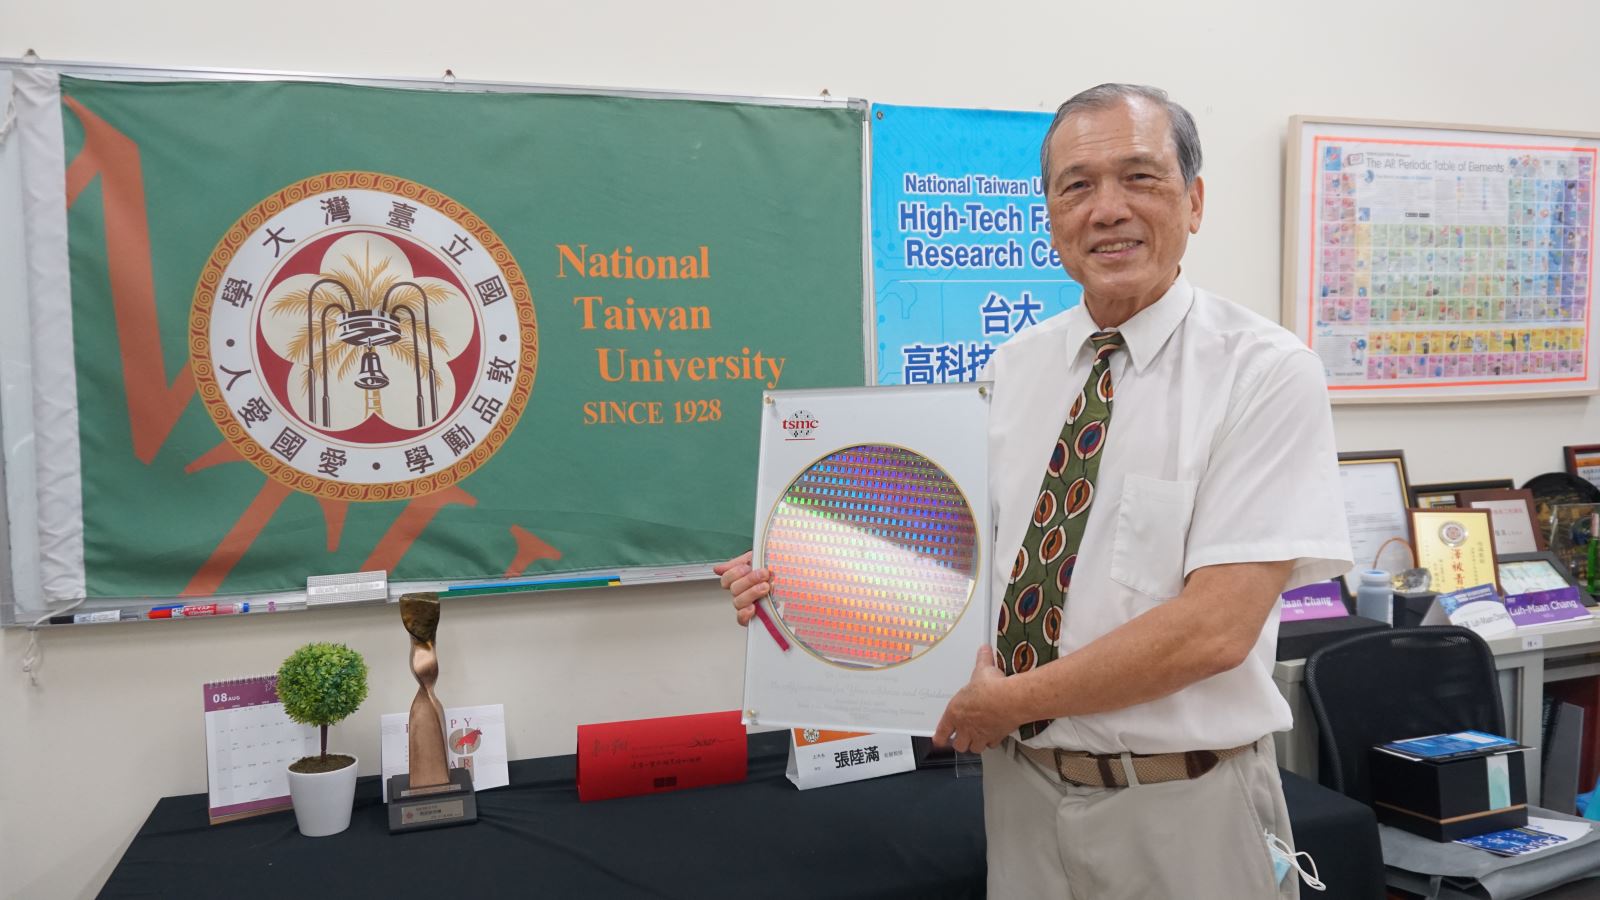 Professor Luh-Maan Chang Holding a 12-inch Wafer